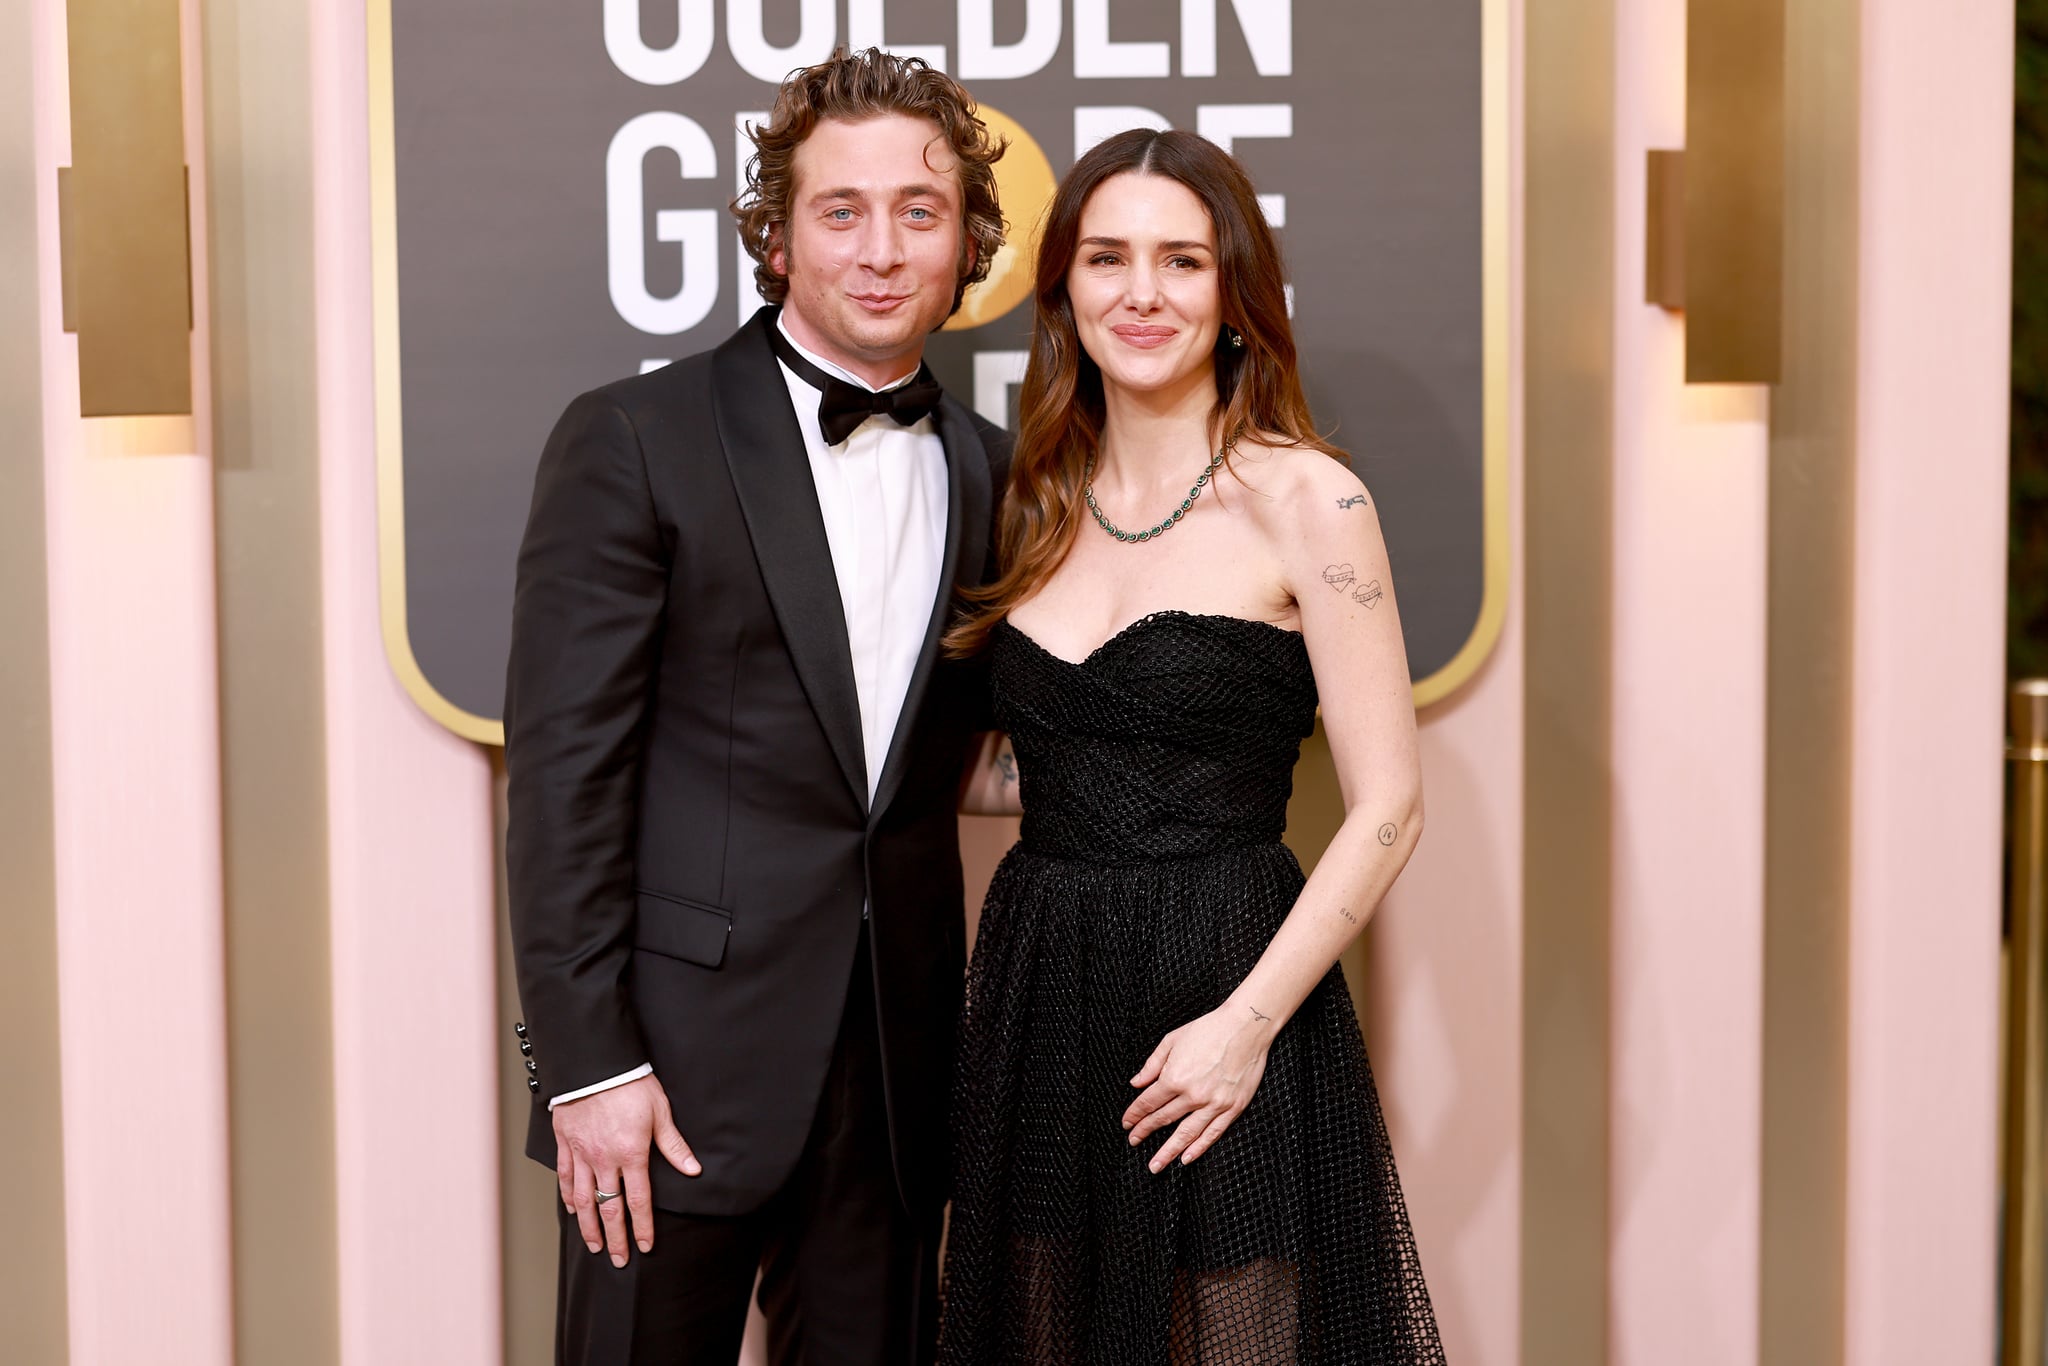 BEVERLY HILLS, CALIFORNIA - JANUARY 10: (L-R) Jeremy Allen White and Addison Timlin attend the 80th Annual Golden Globe Awards at The Beverly Hilton on January 10, 2023 in Beverly Hills, California. (Photo by Matt Winkelmeyer/FilmMagic)